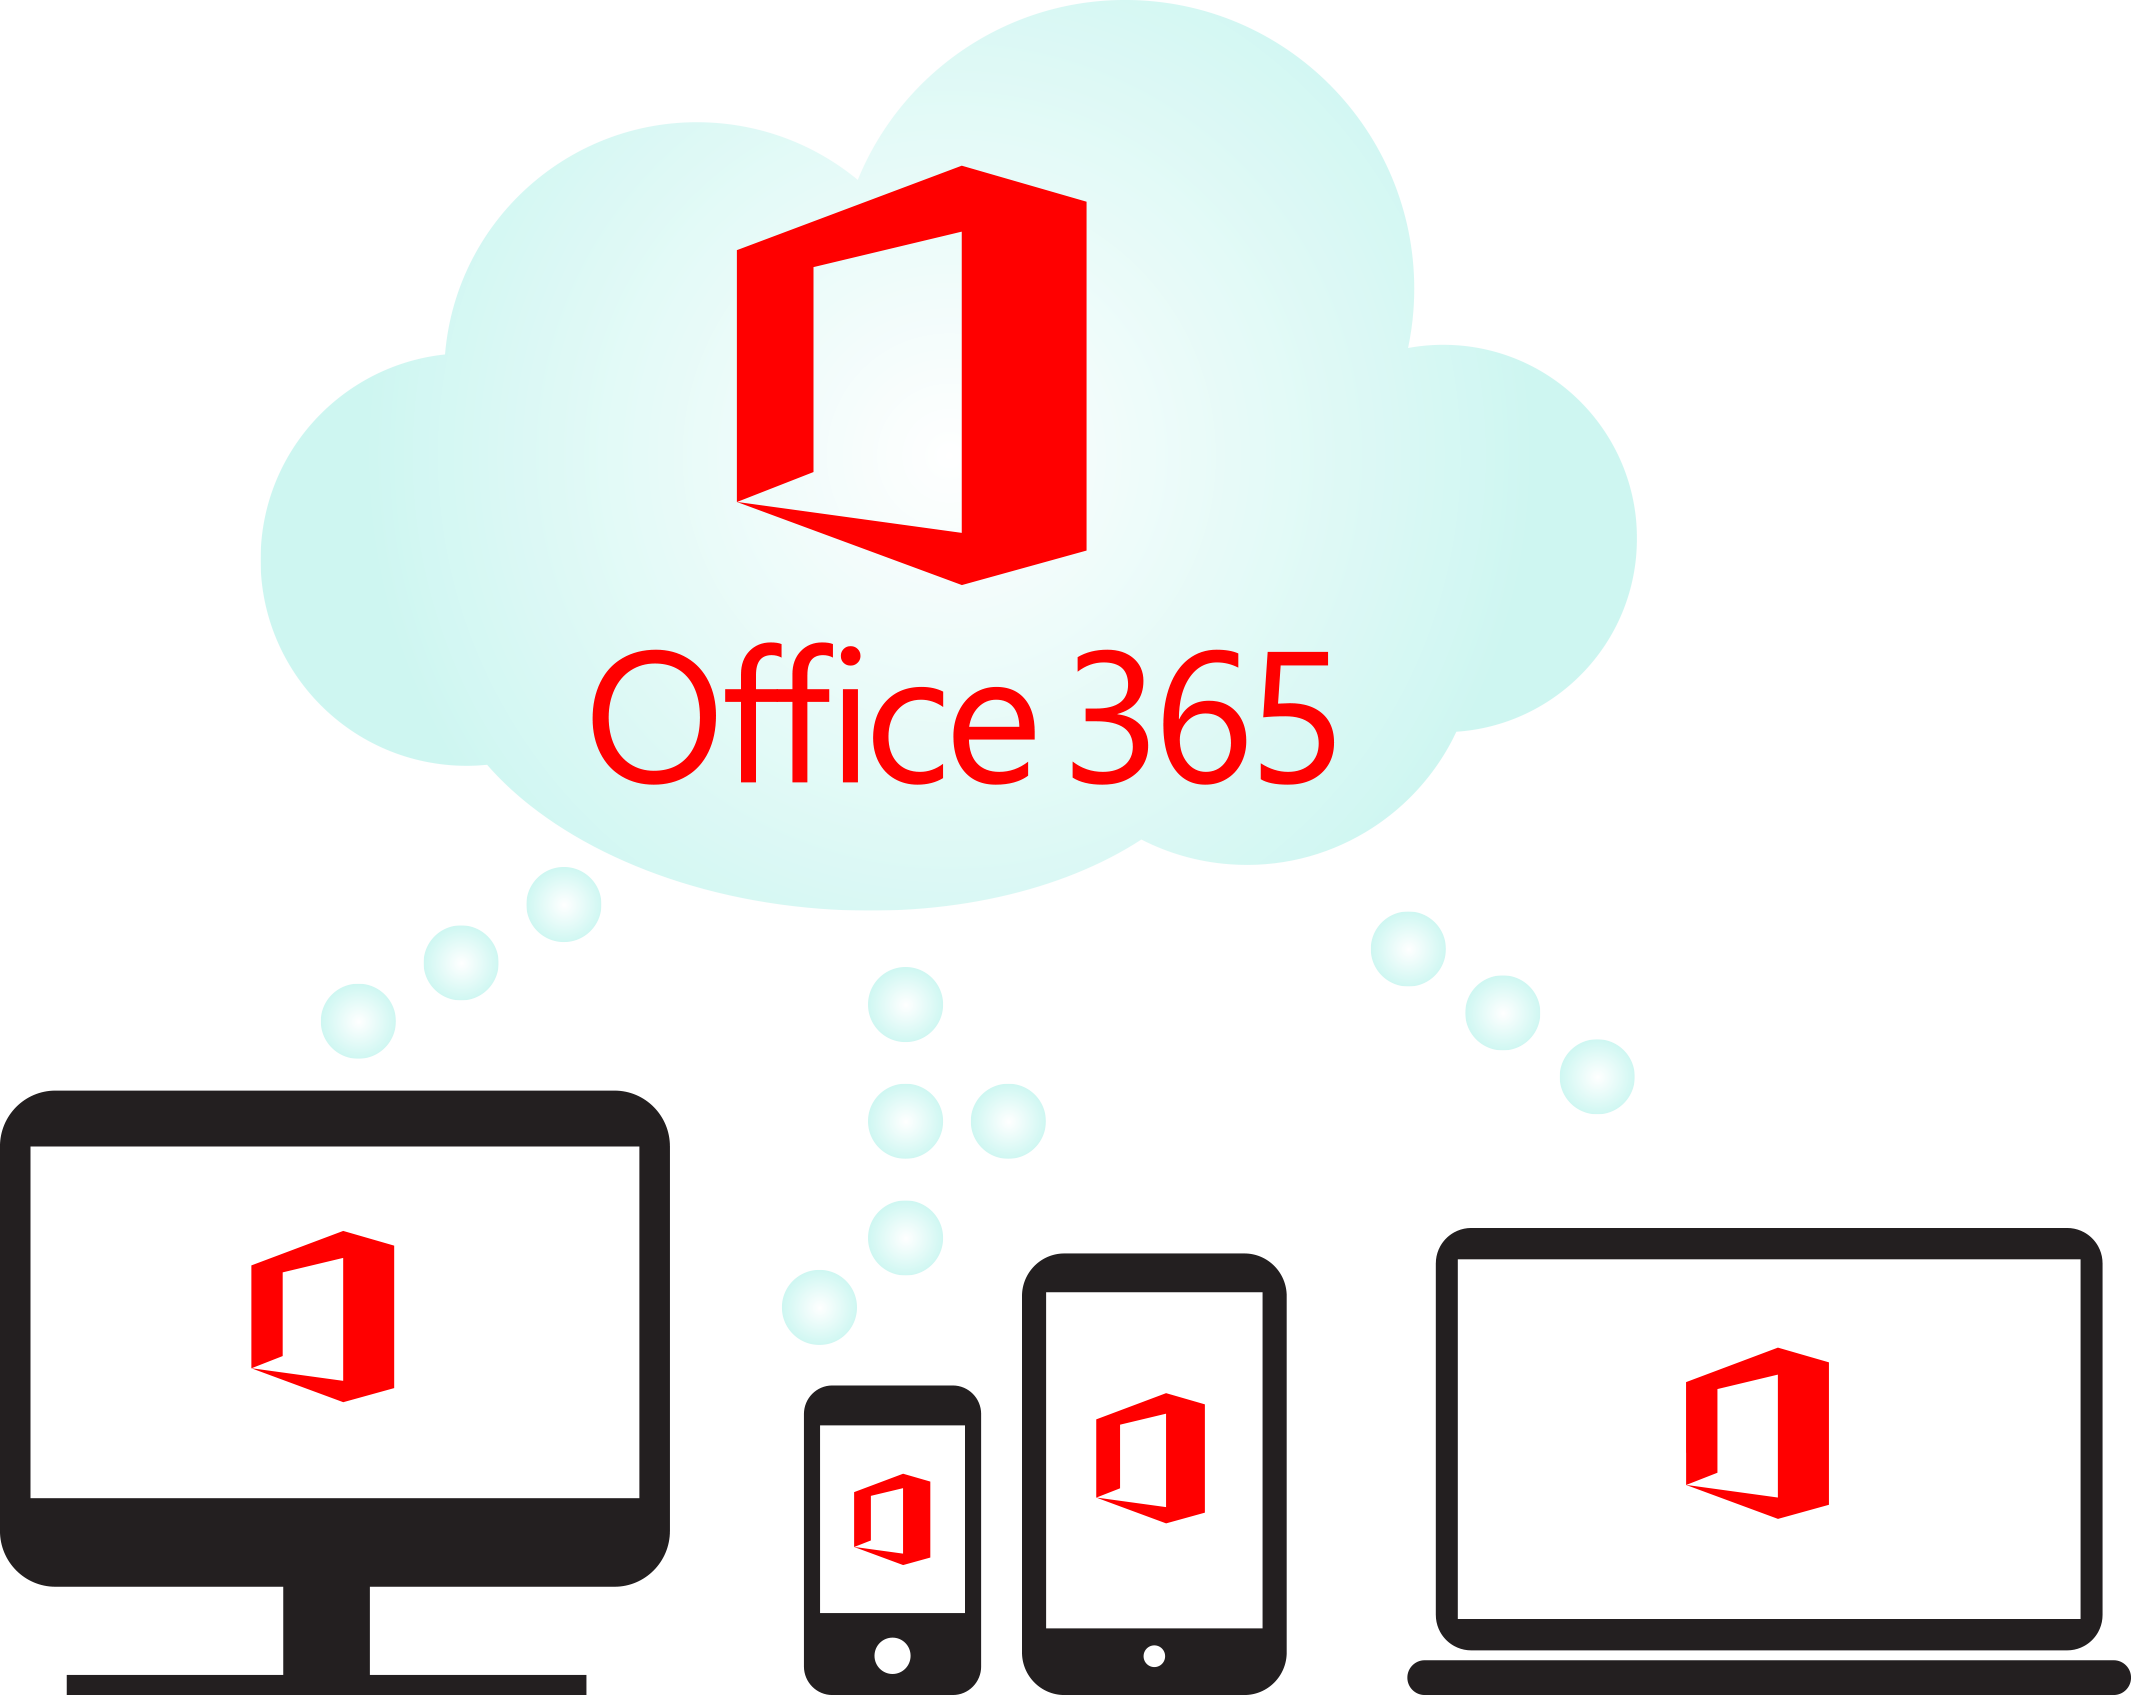 All Well-known Microsoft Applications Are Now Offered - Office 365 Enterprise E3 (2131x1695)